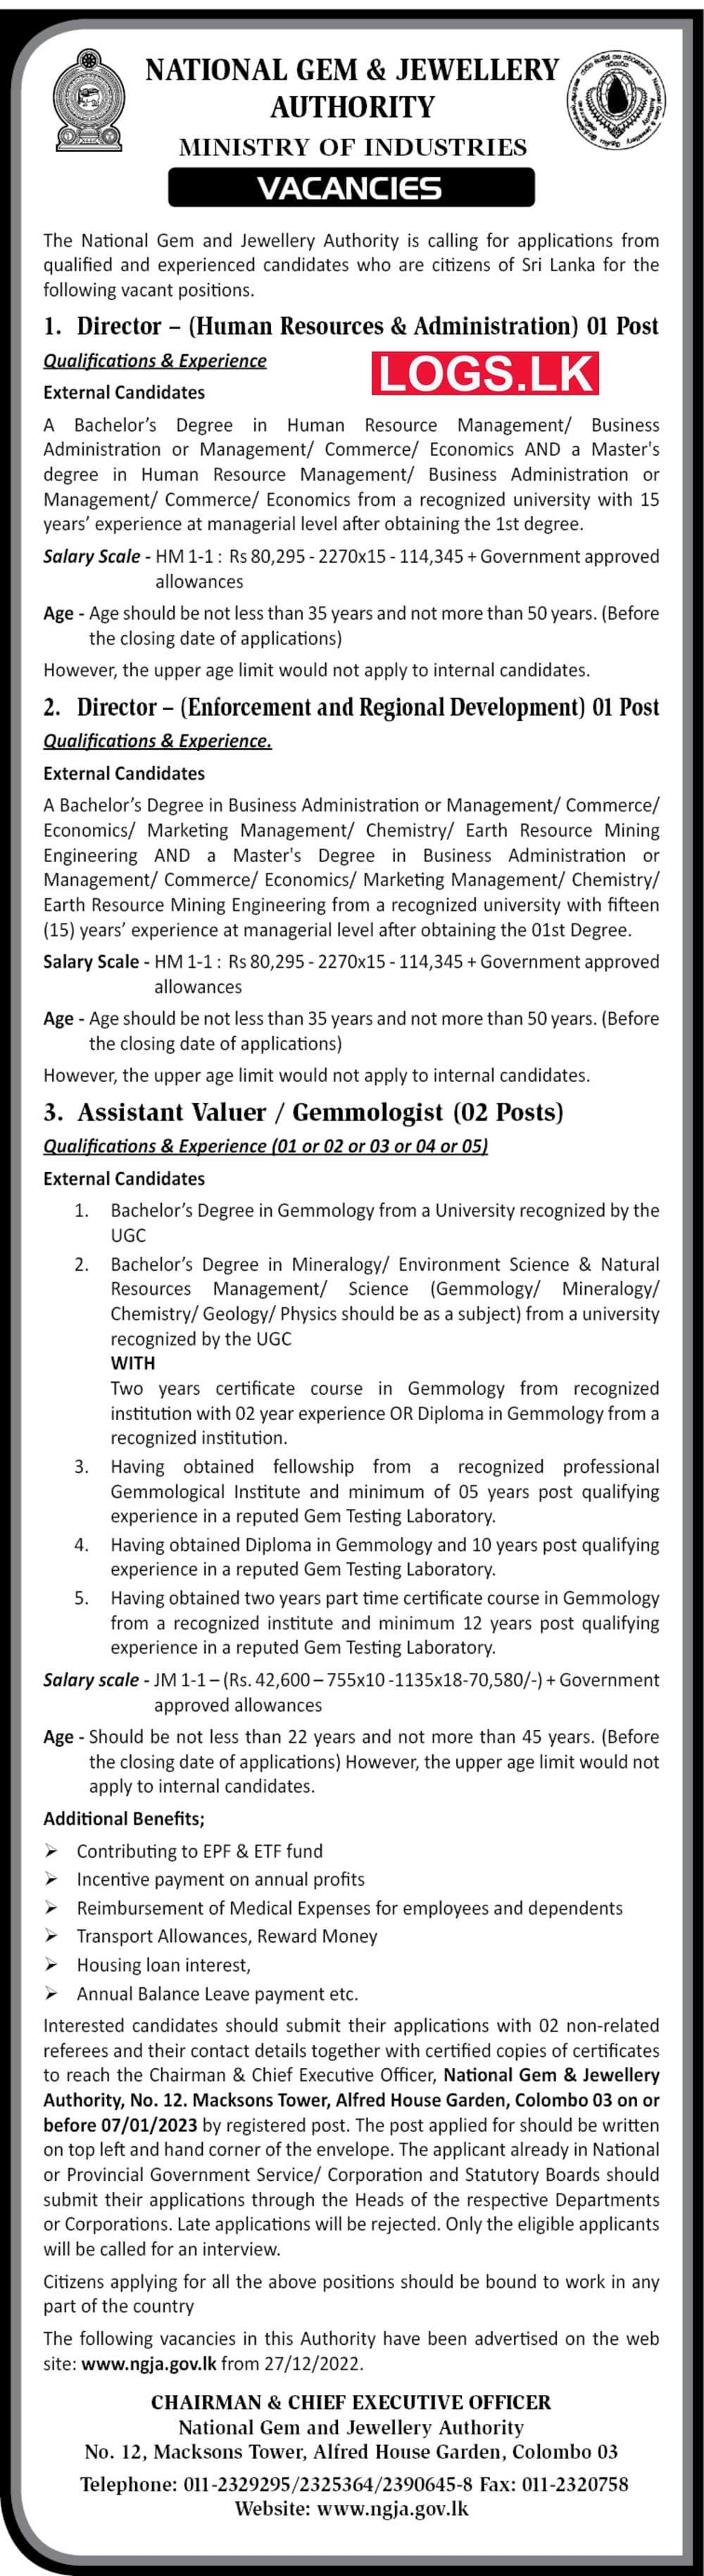 National Gem & Jewellery Authority Vacancies 2023 Application Form, Details Download